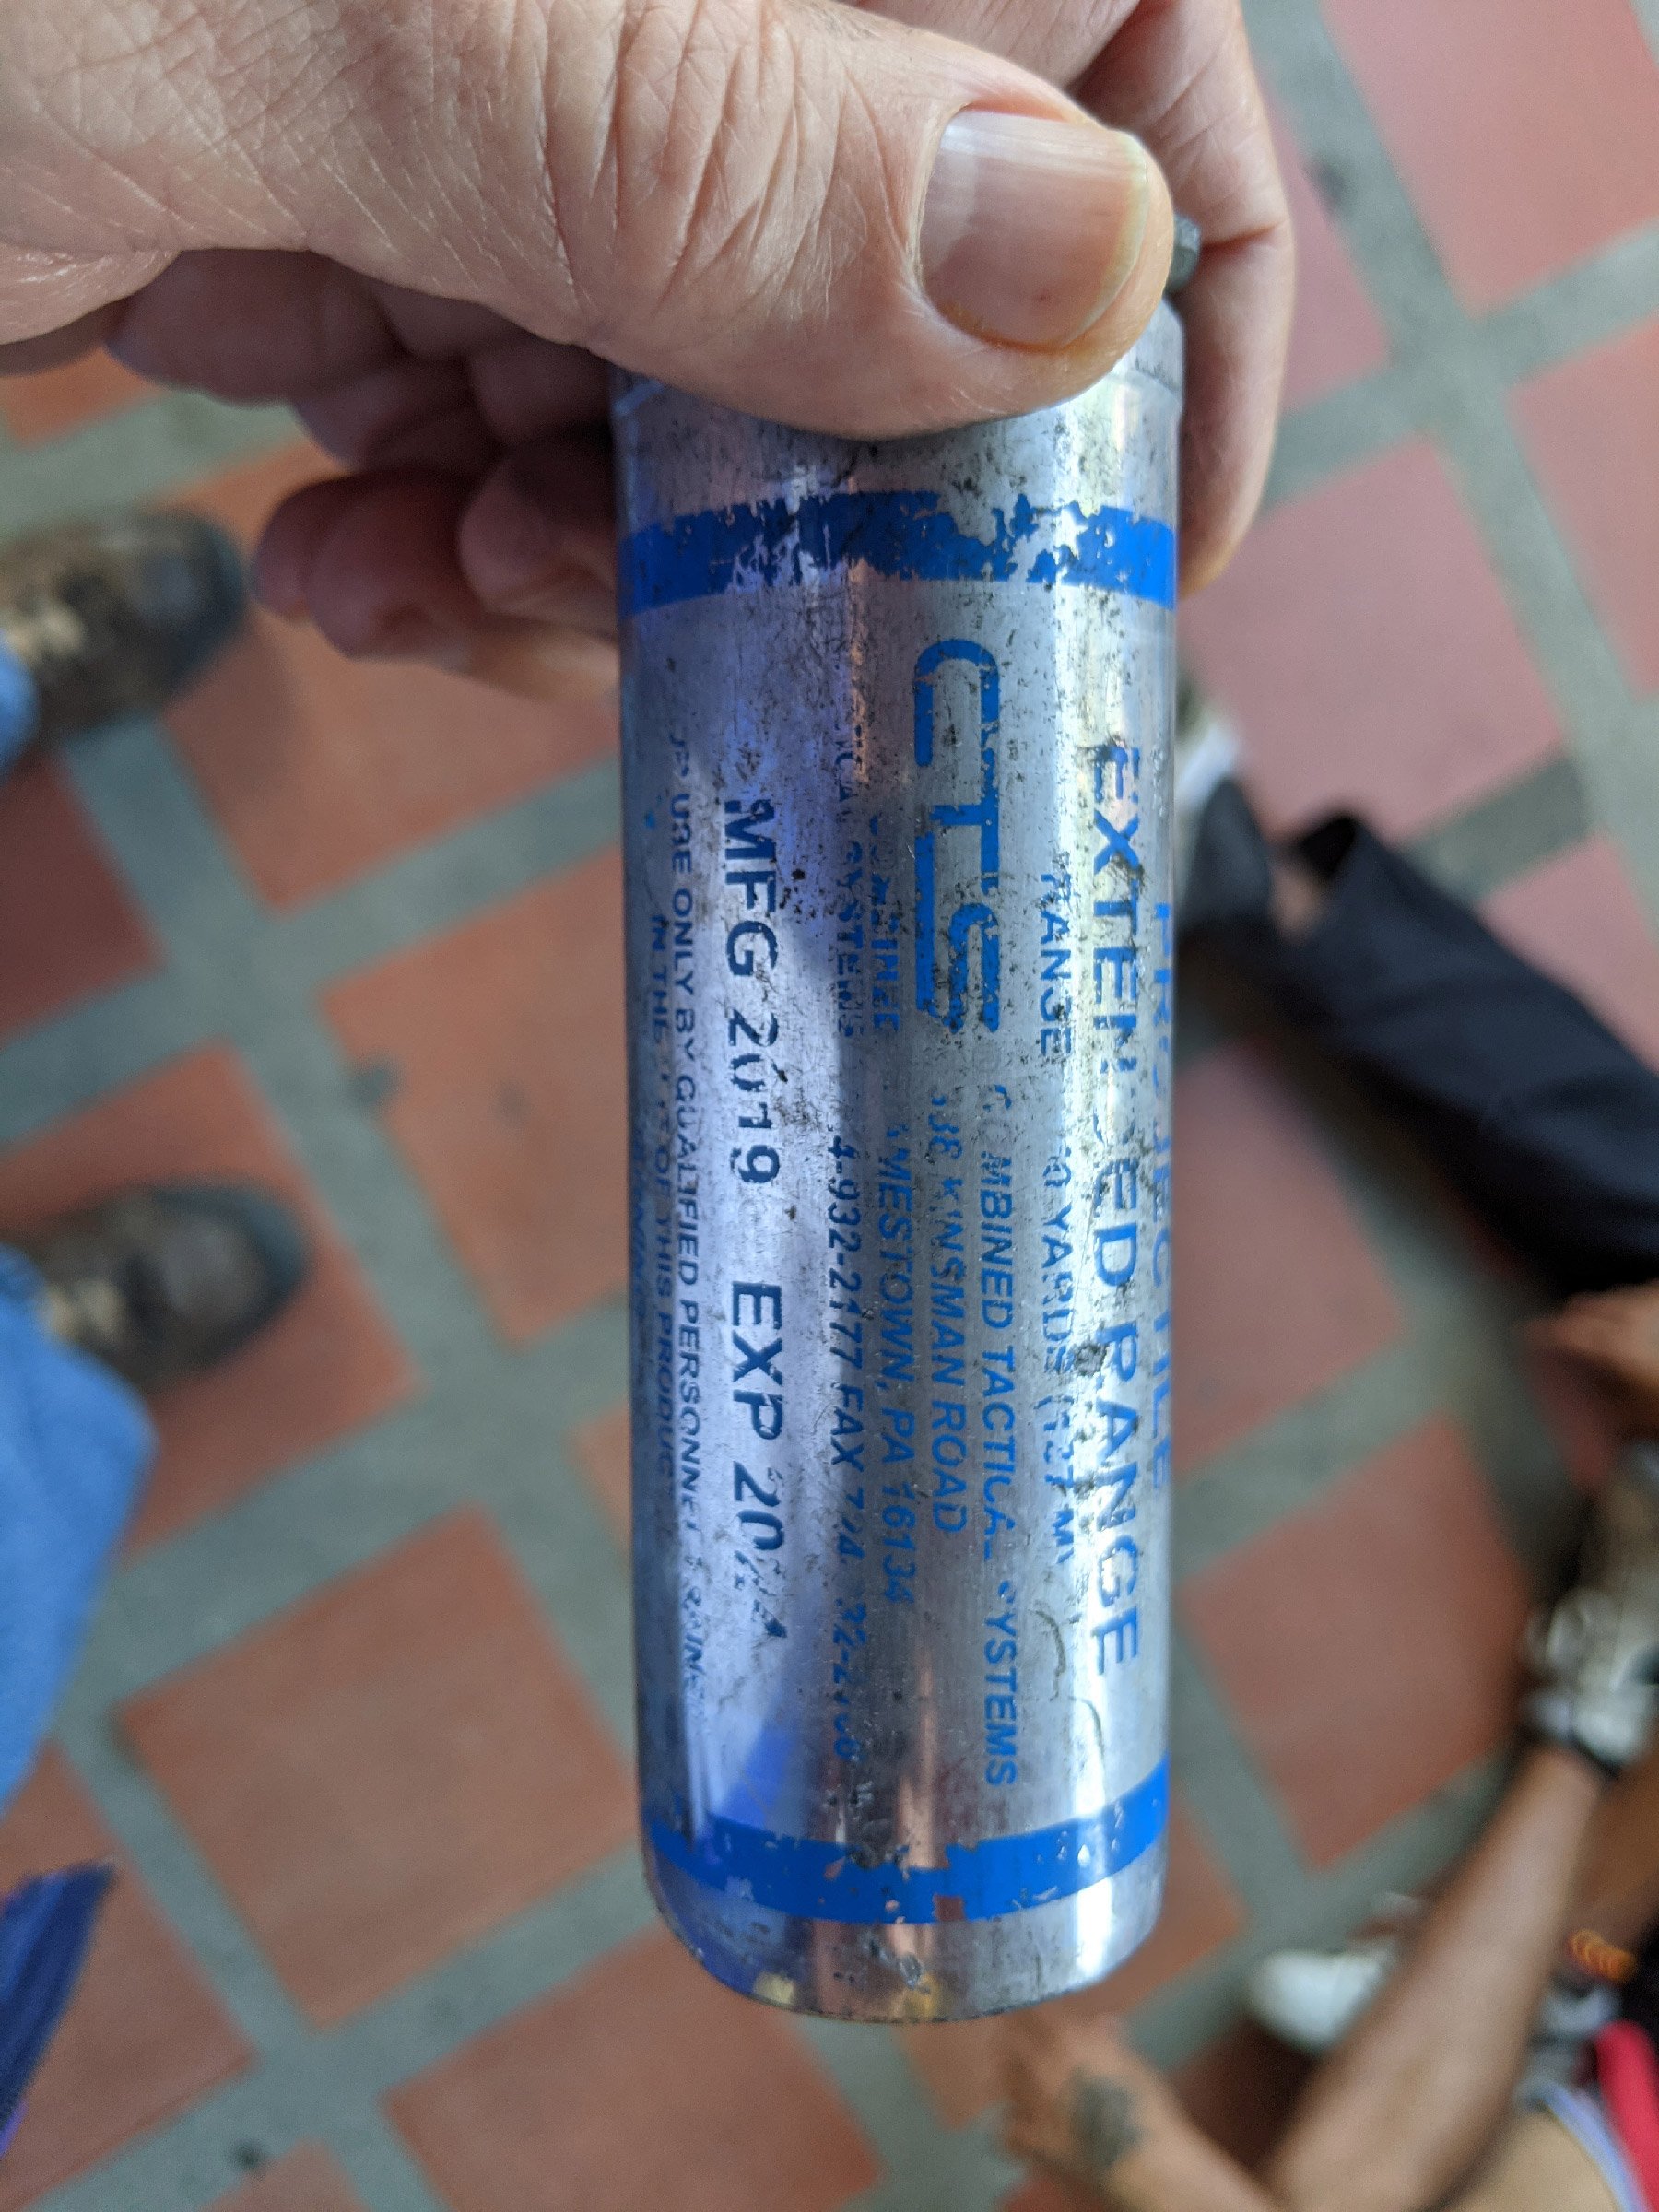 A tear gas shell, made in the U.S., used in Valle del Cauca, Colombia, May 2021.